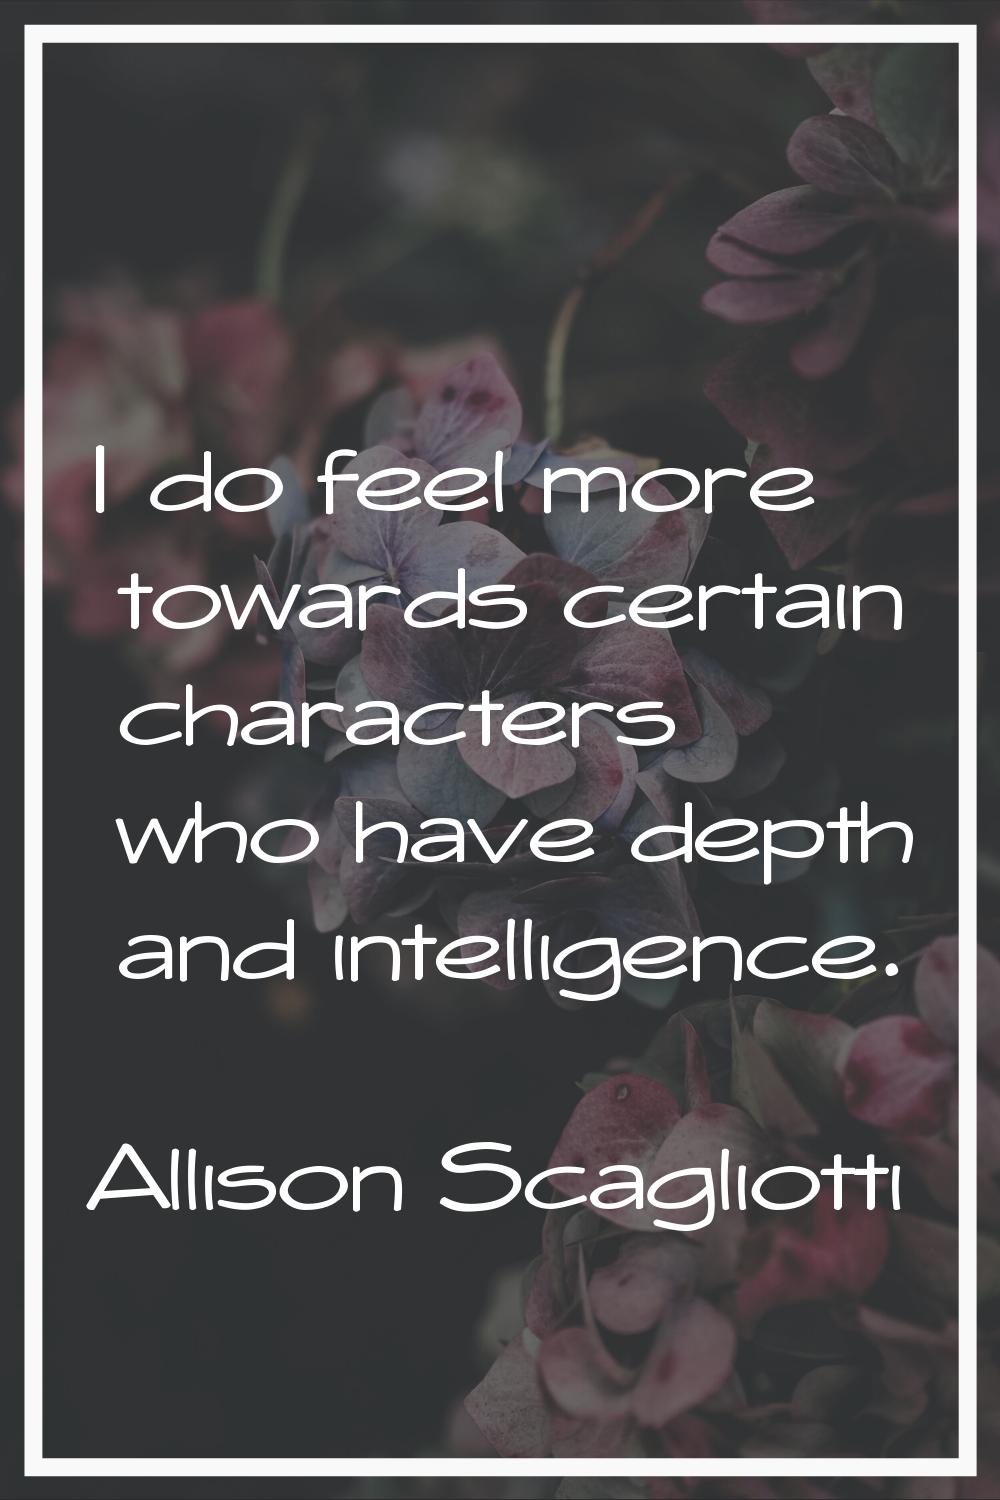 I do feel more towards certain characters who have depth and intelligence.